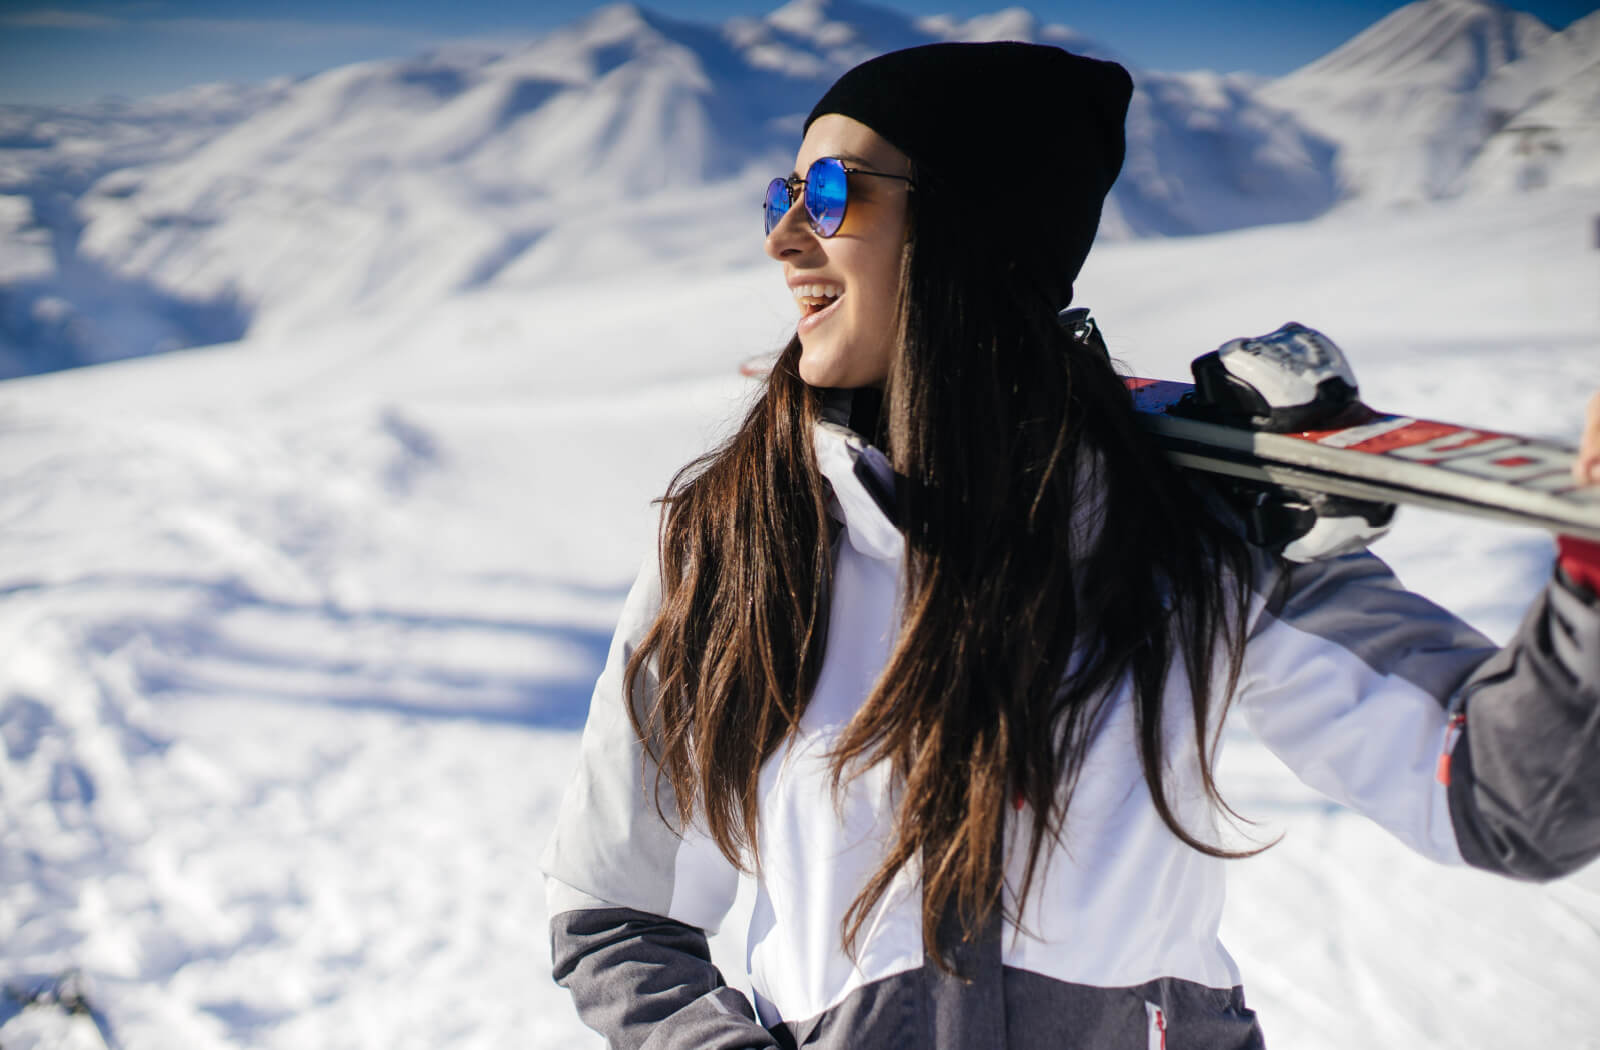 A snowboarder wearing polarized sunglasses looking out at a distance.